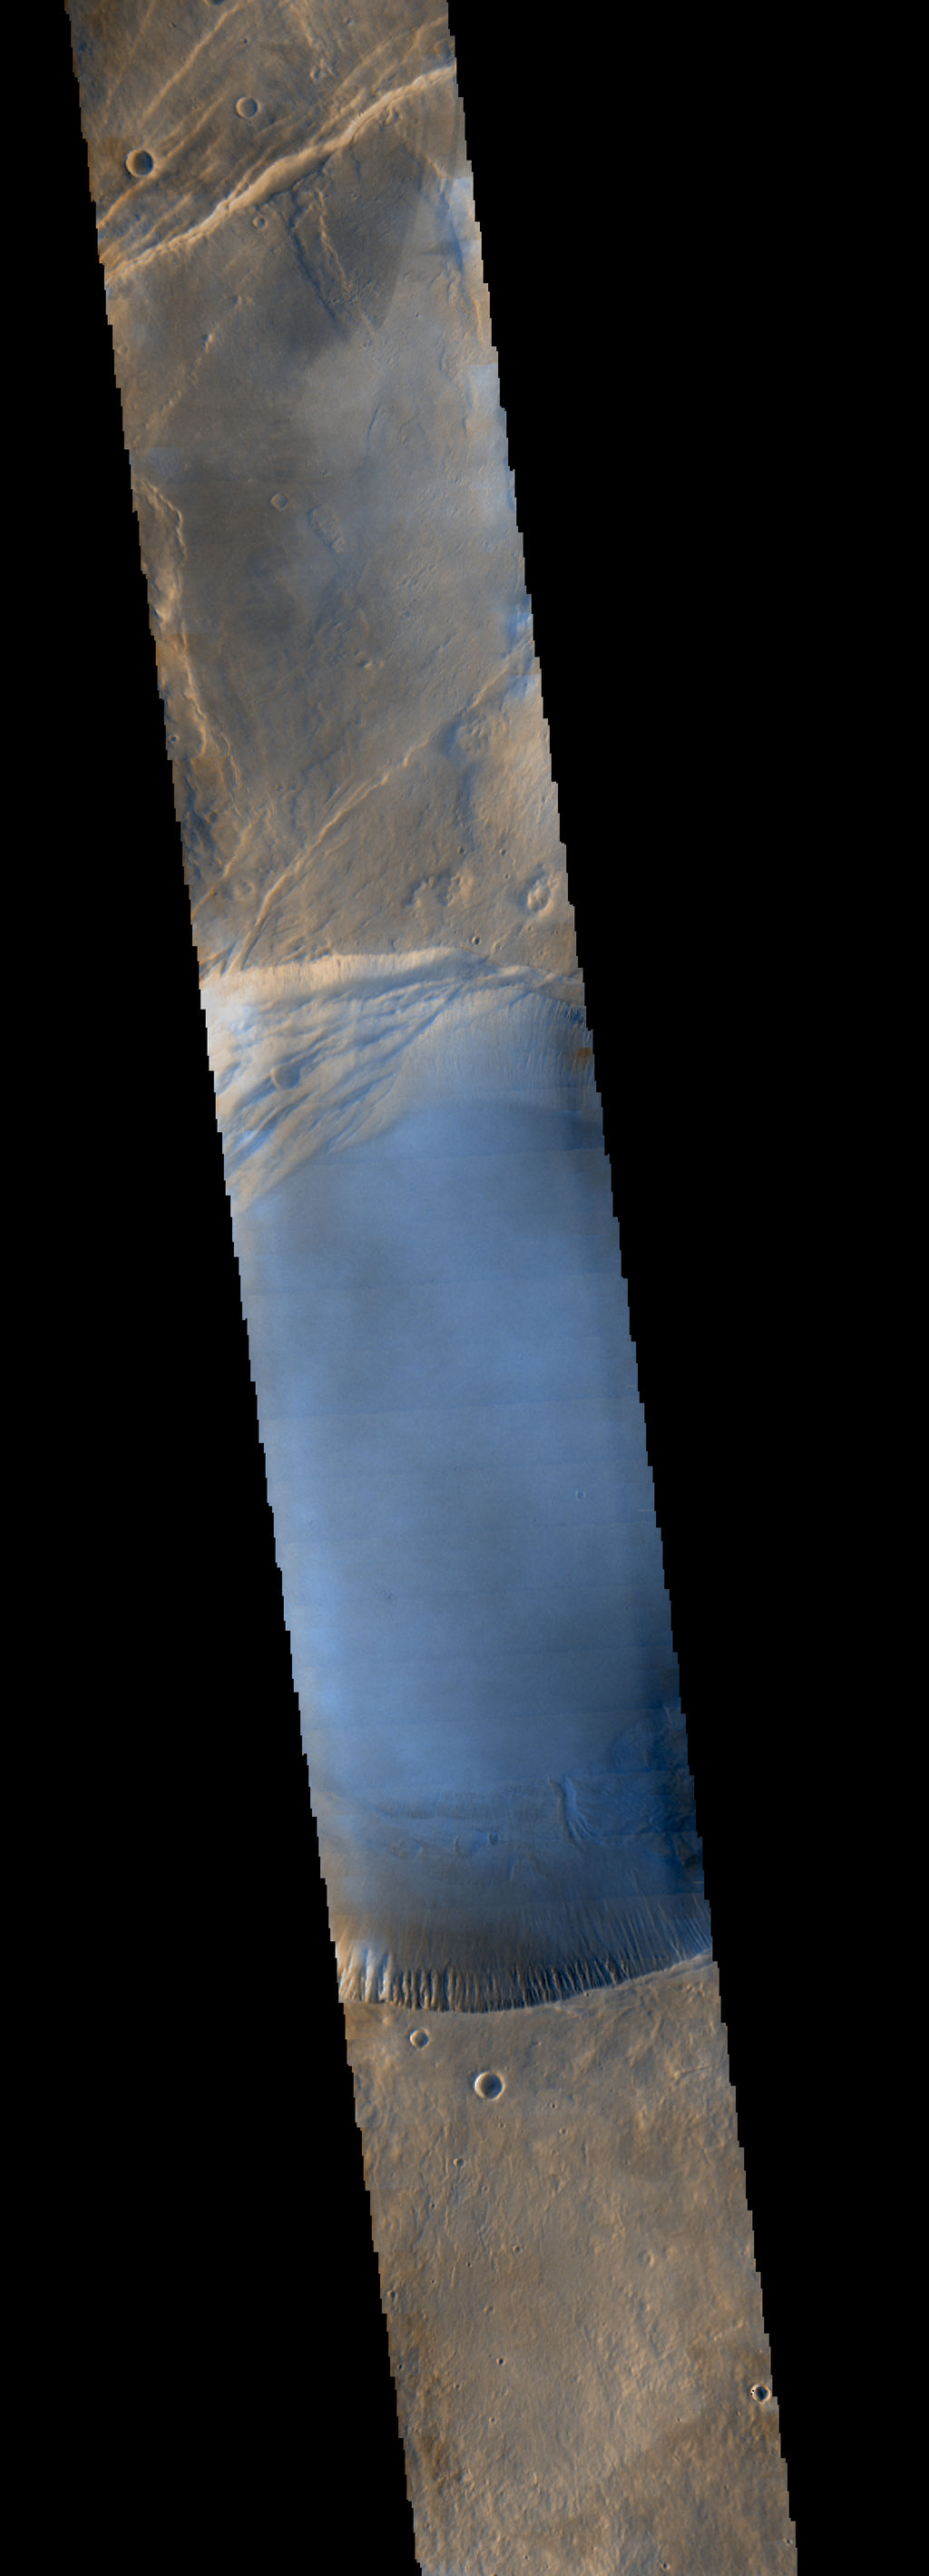 Seen shortly after local Martian sunrise, clouds gather in the summit pit, or caldera, of Arsia Mons, a giant volcano on Mars, in this image from the Thermal Emission Imaging System (THEMIS) on NASA's Mars Odyssey orbiter.